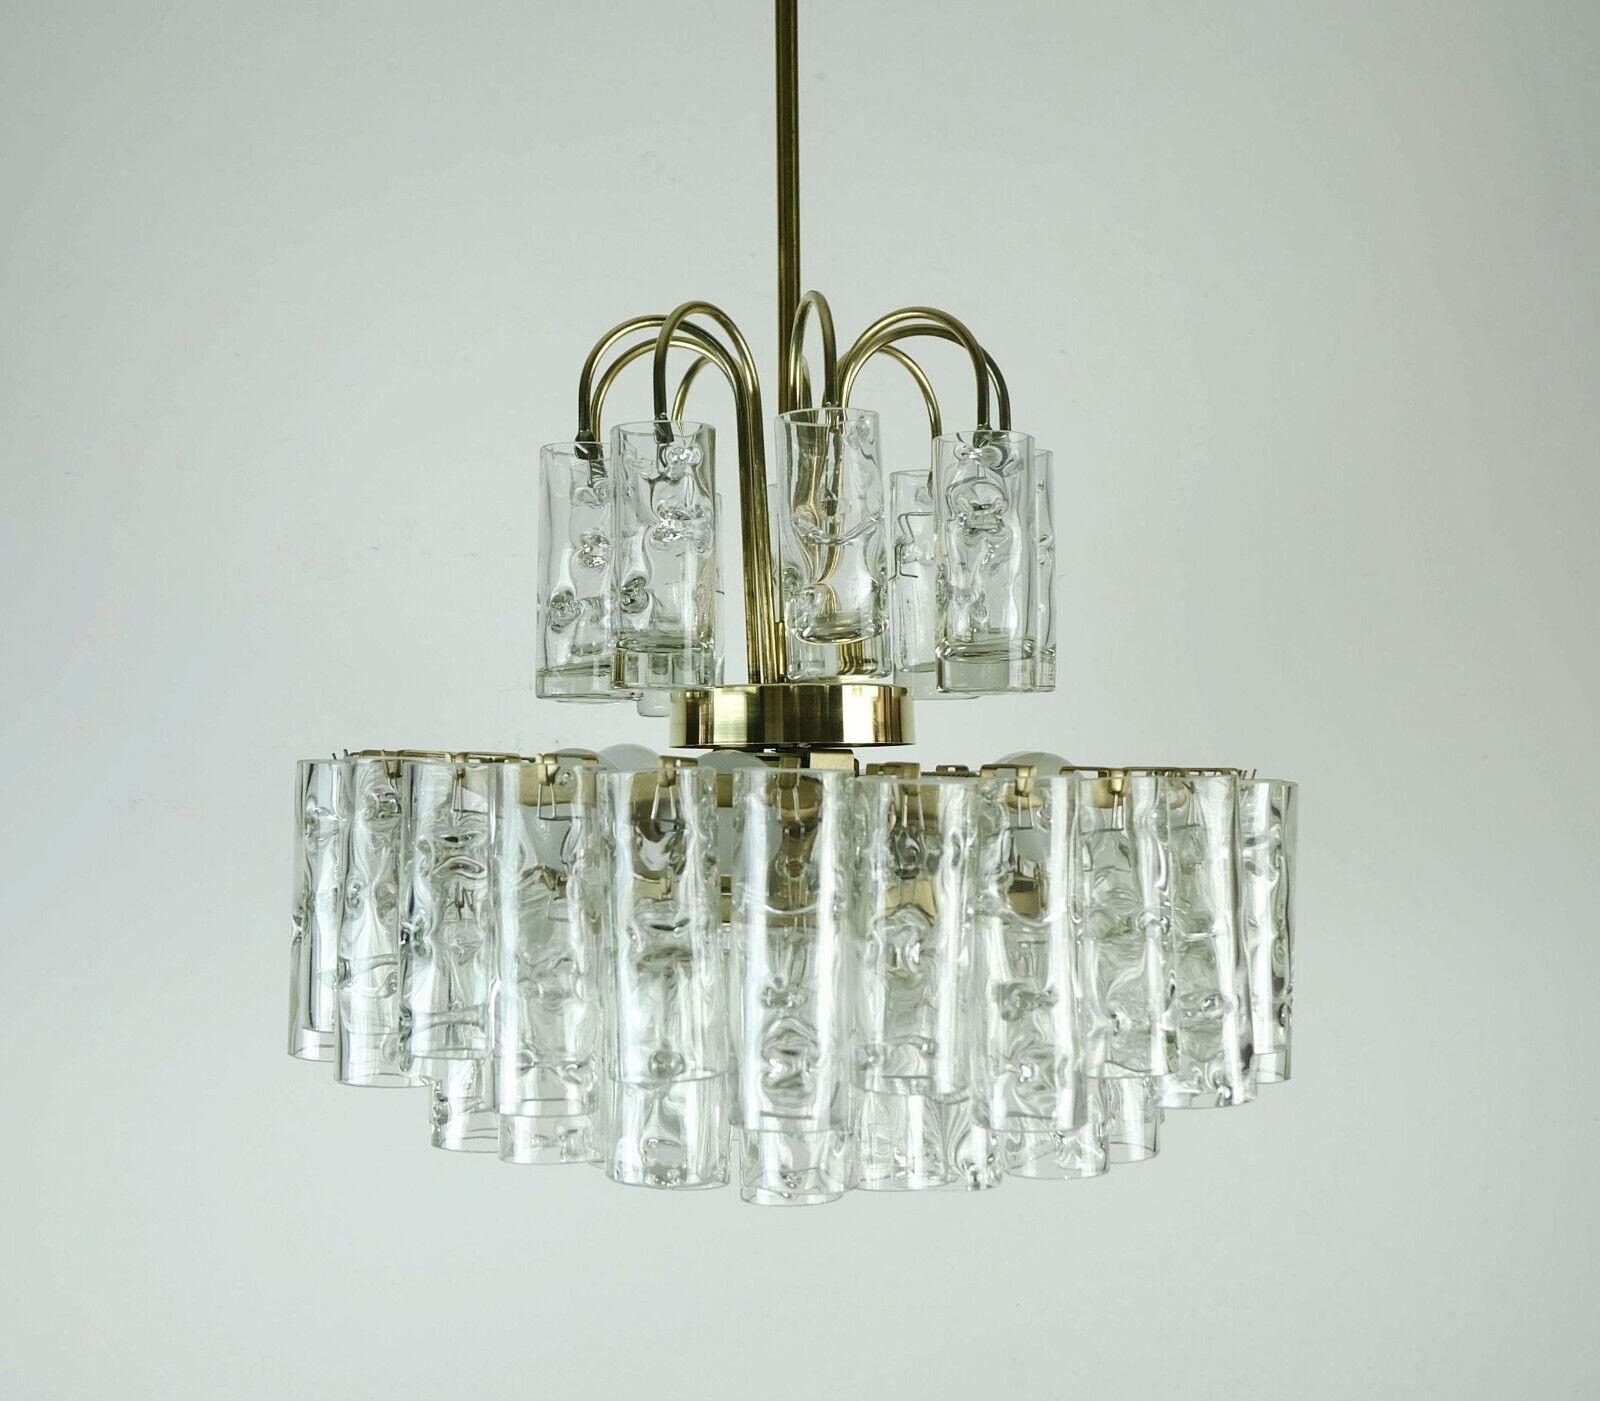 4-Tier Doria Chandelier with 62 Glass Tubes Ice Glass Structured Glass, 1960s For Sale 2